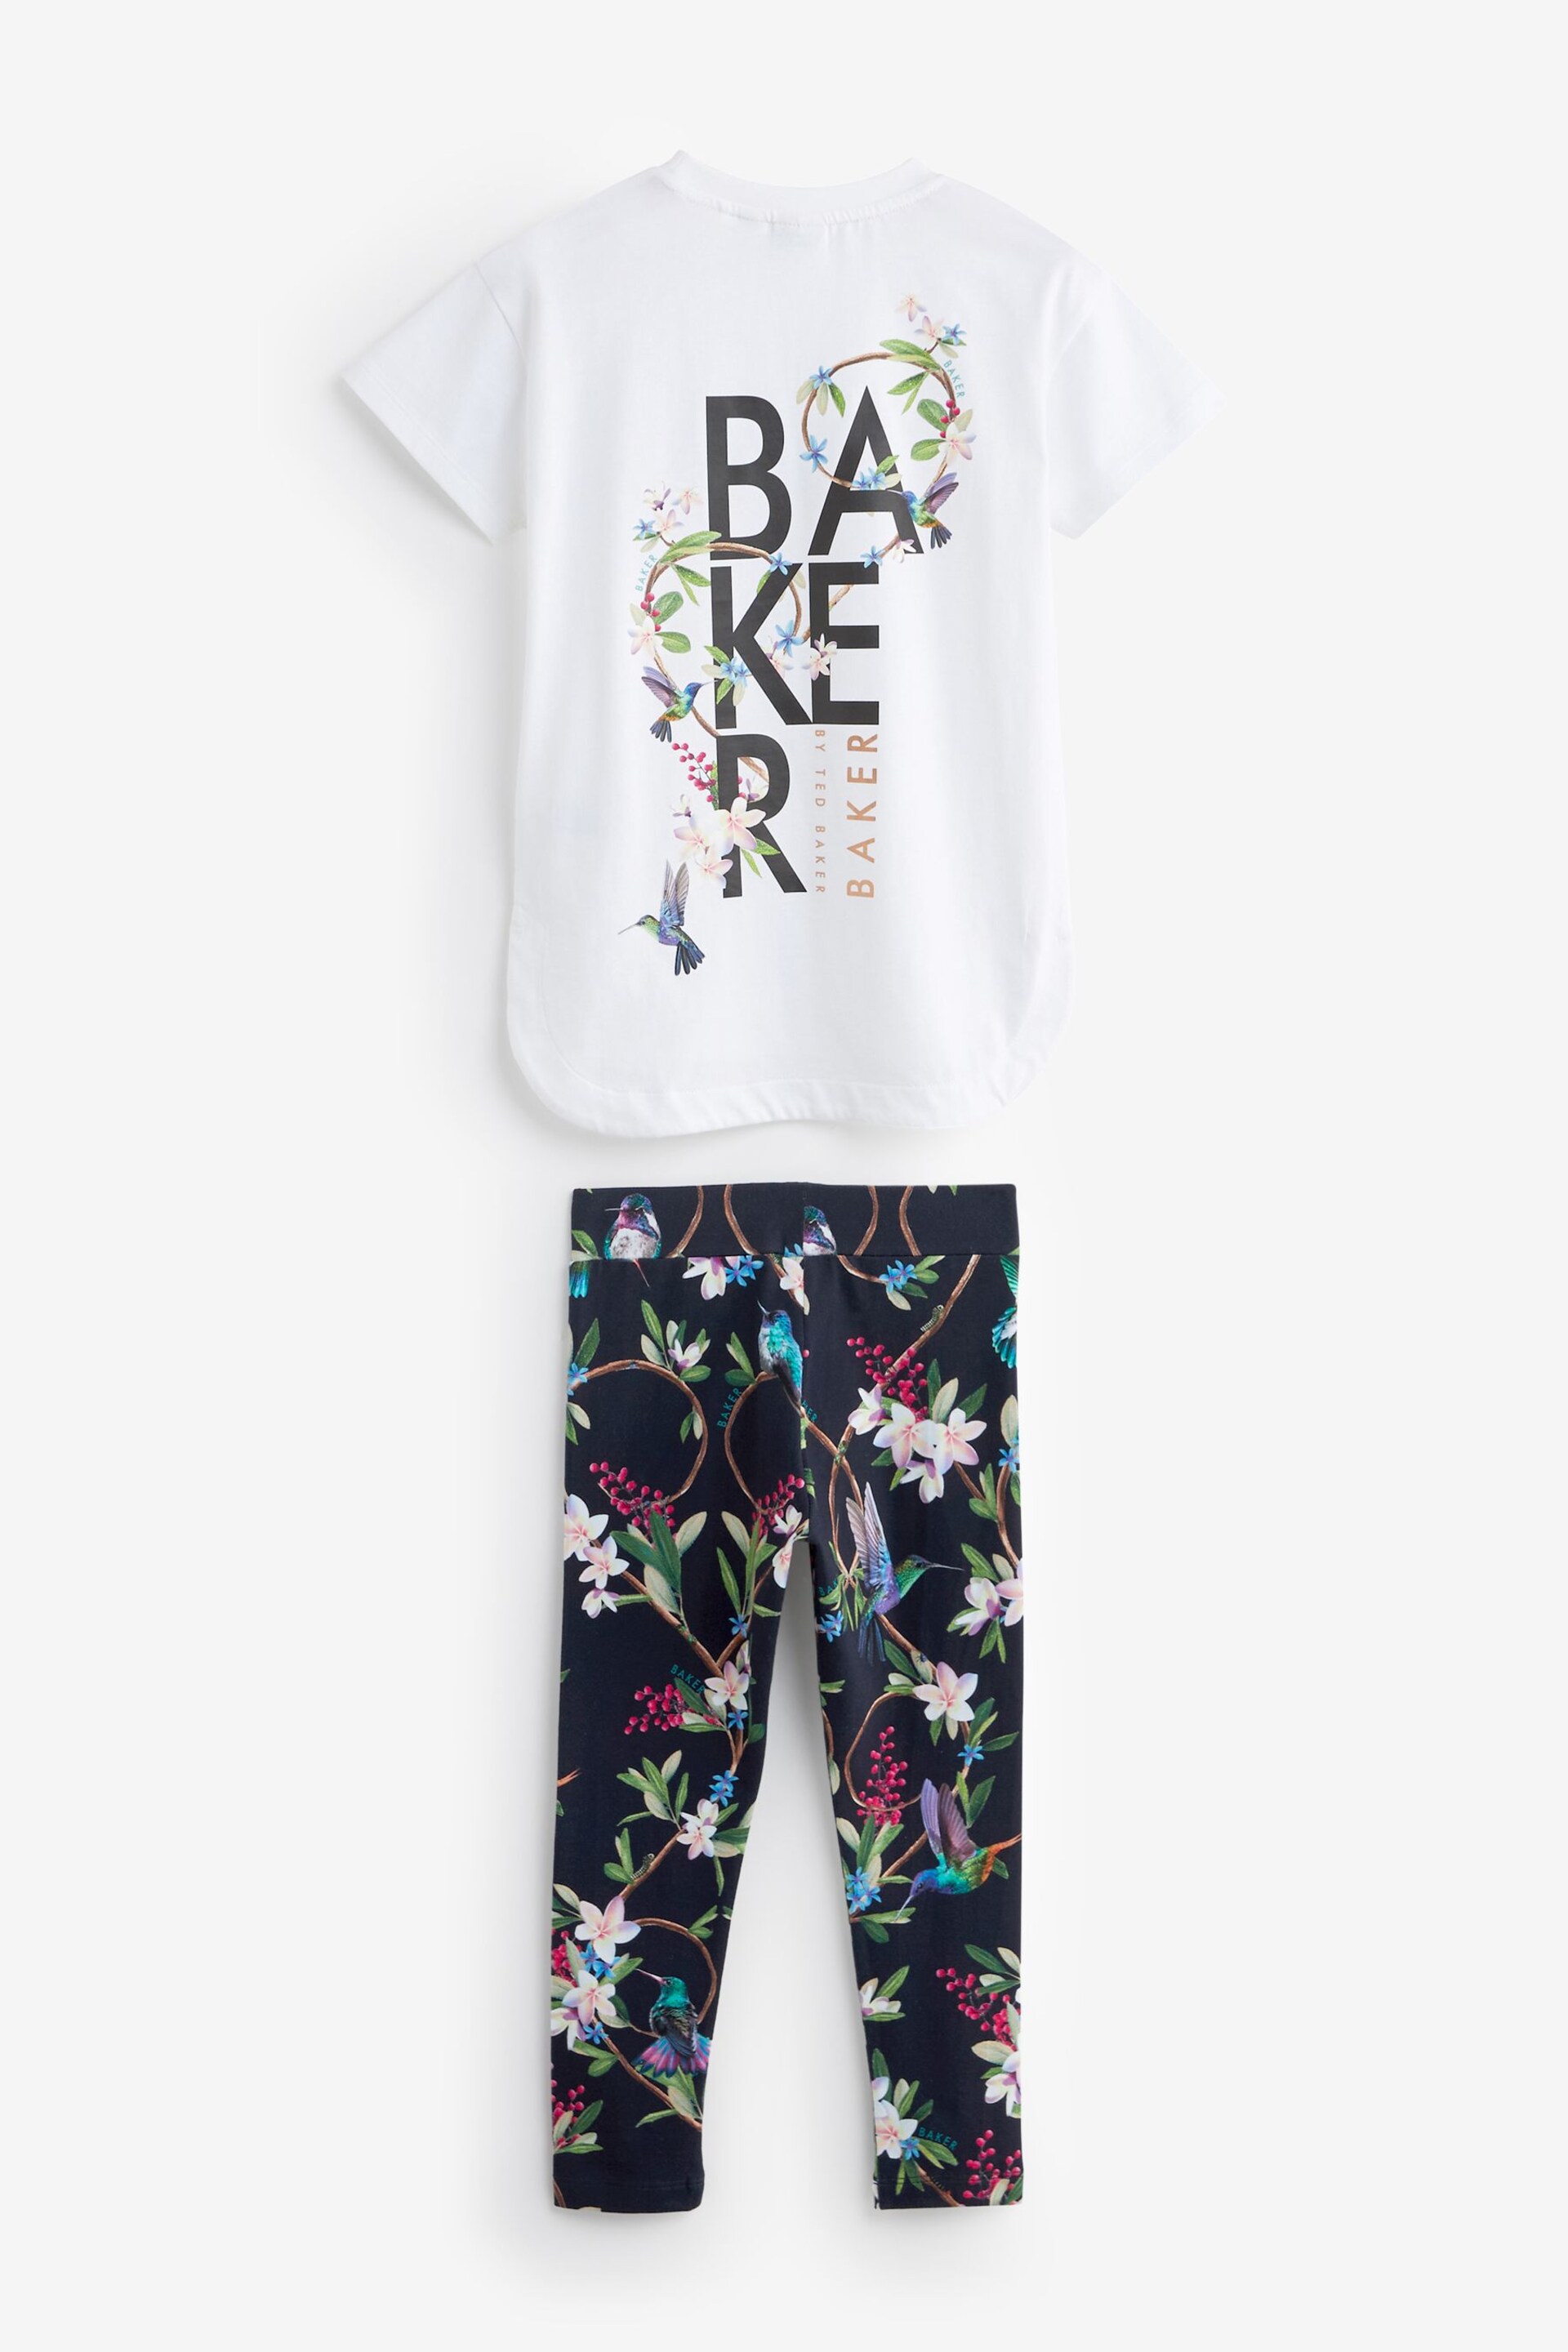 Baker by Ted Baker Navy Graphic T-Shirt and Legging Set - Image 9 of 11